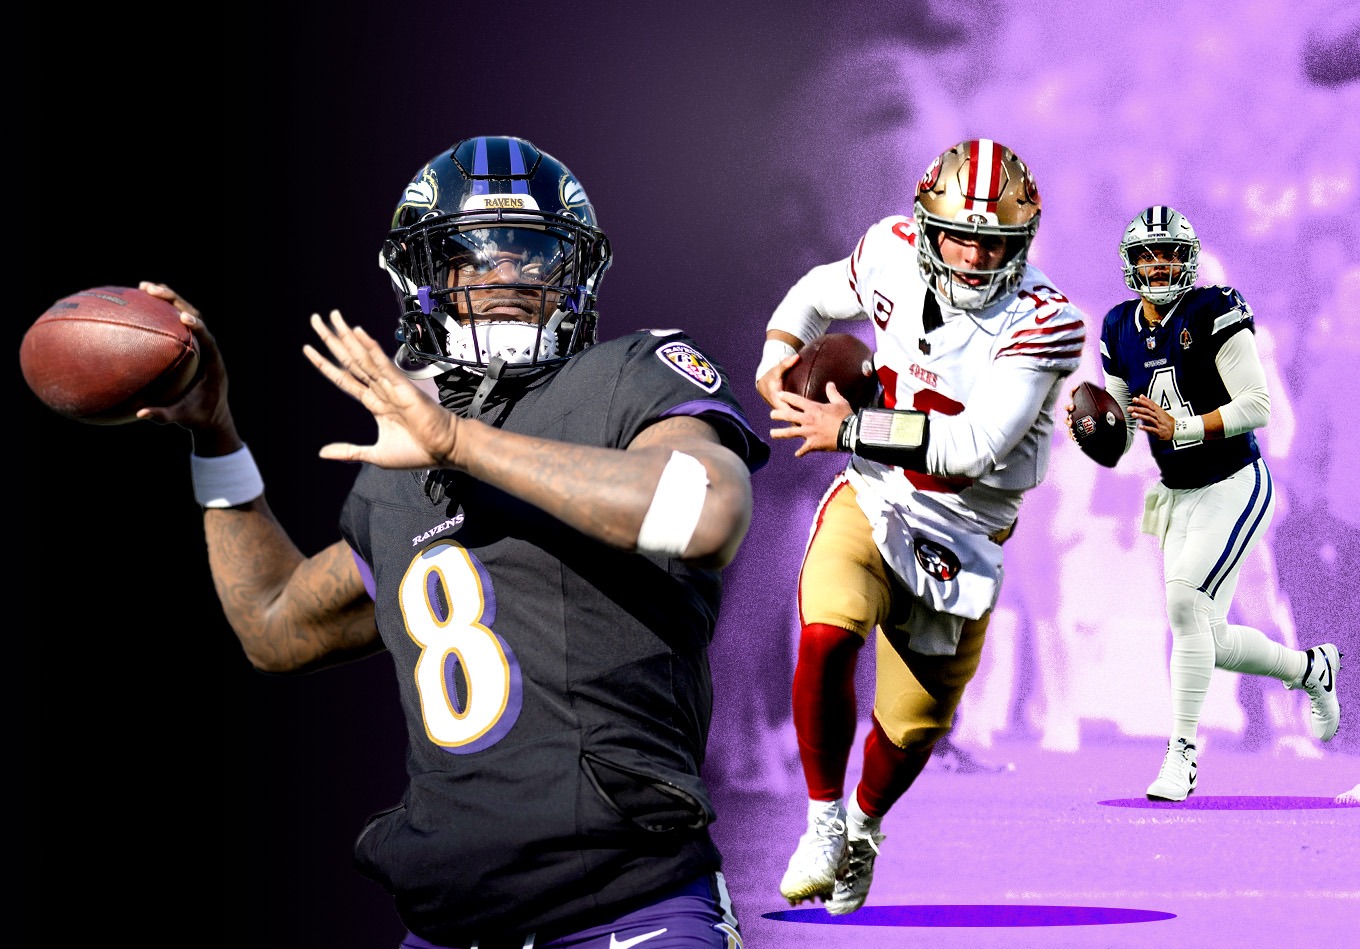 Should Lamar Jackson Be a Lock to Win the NFL MVP Race? Not According to the Data